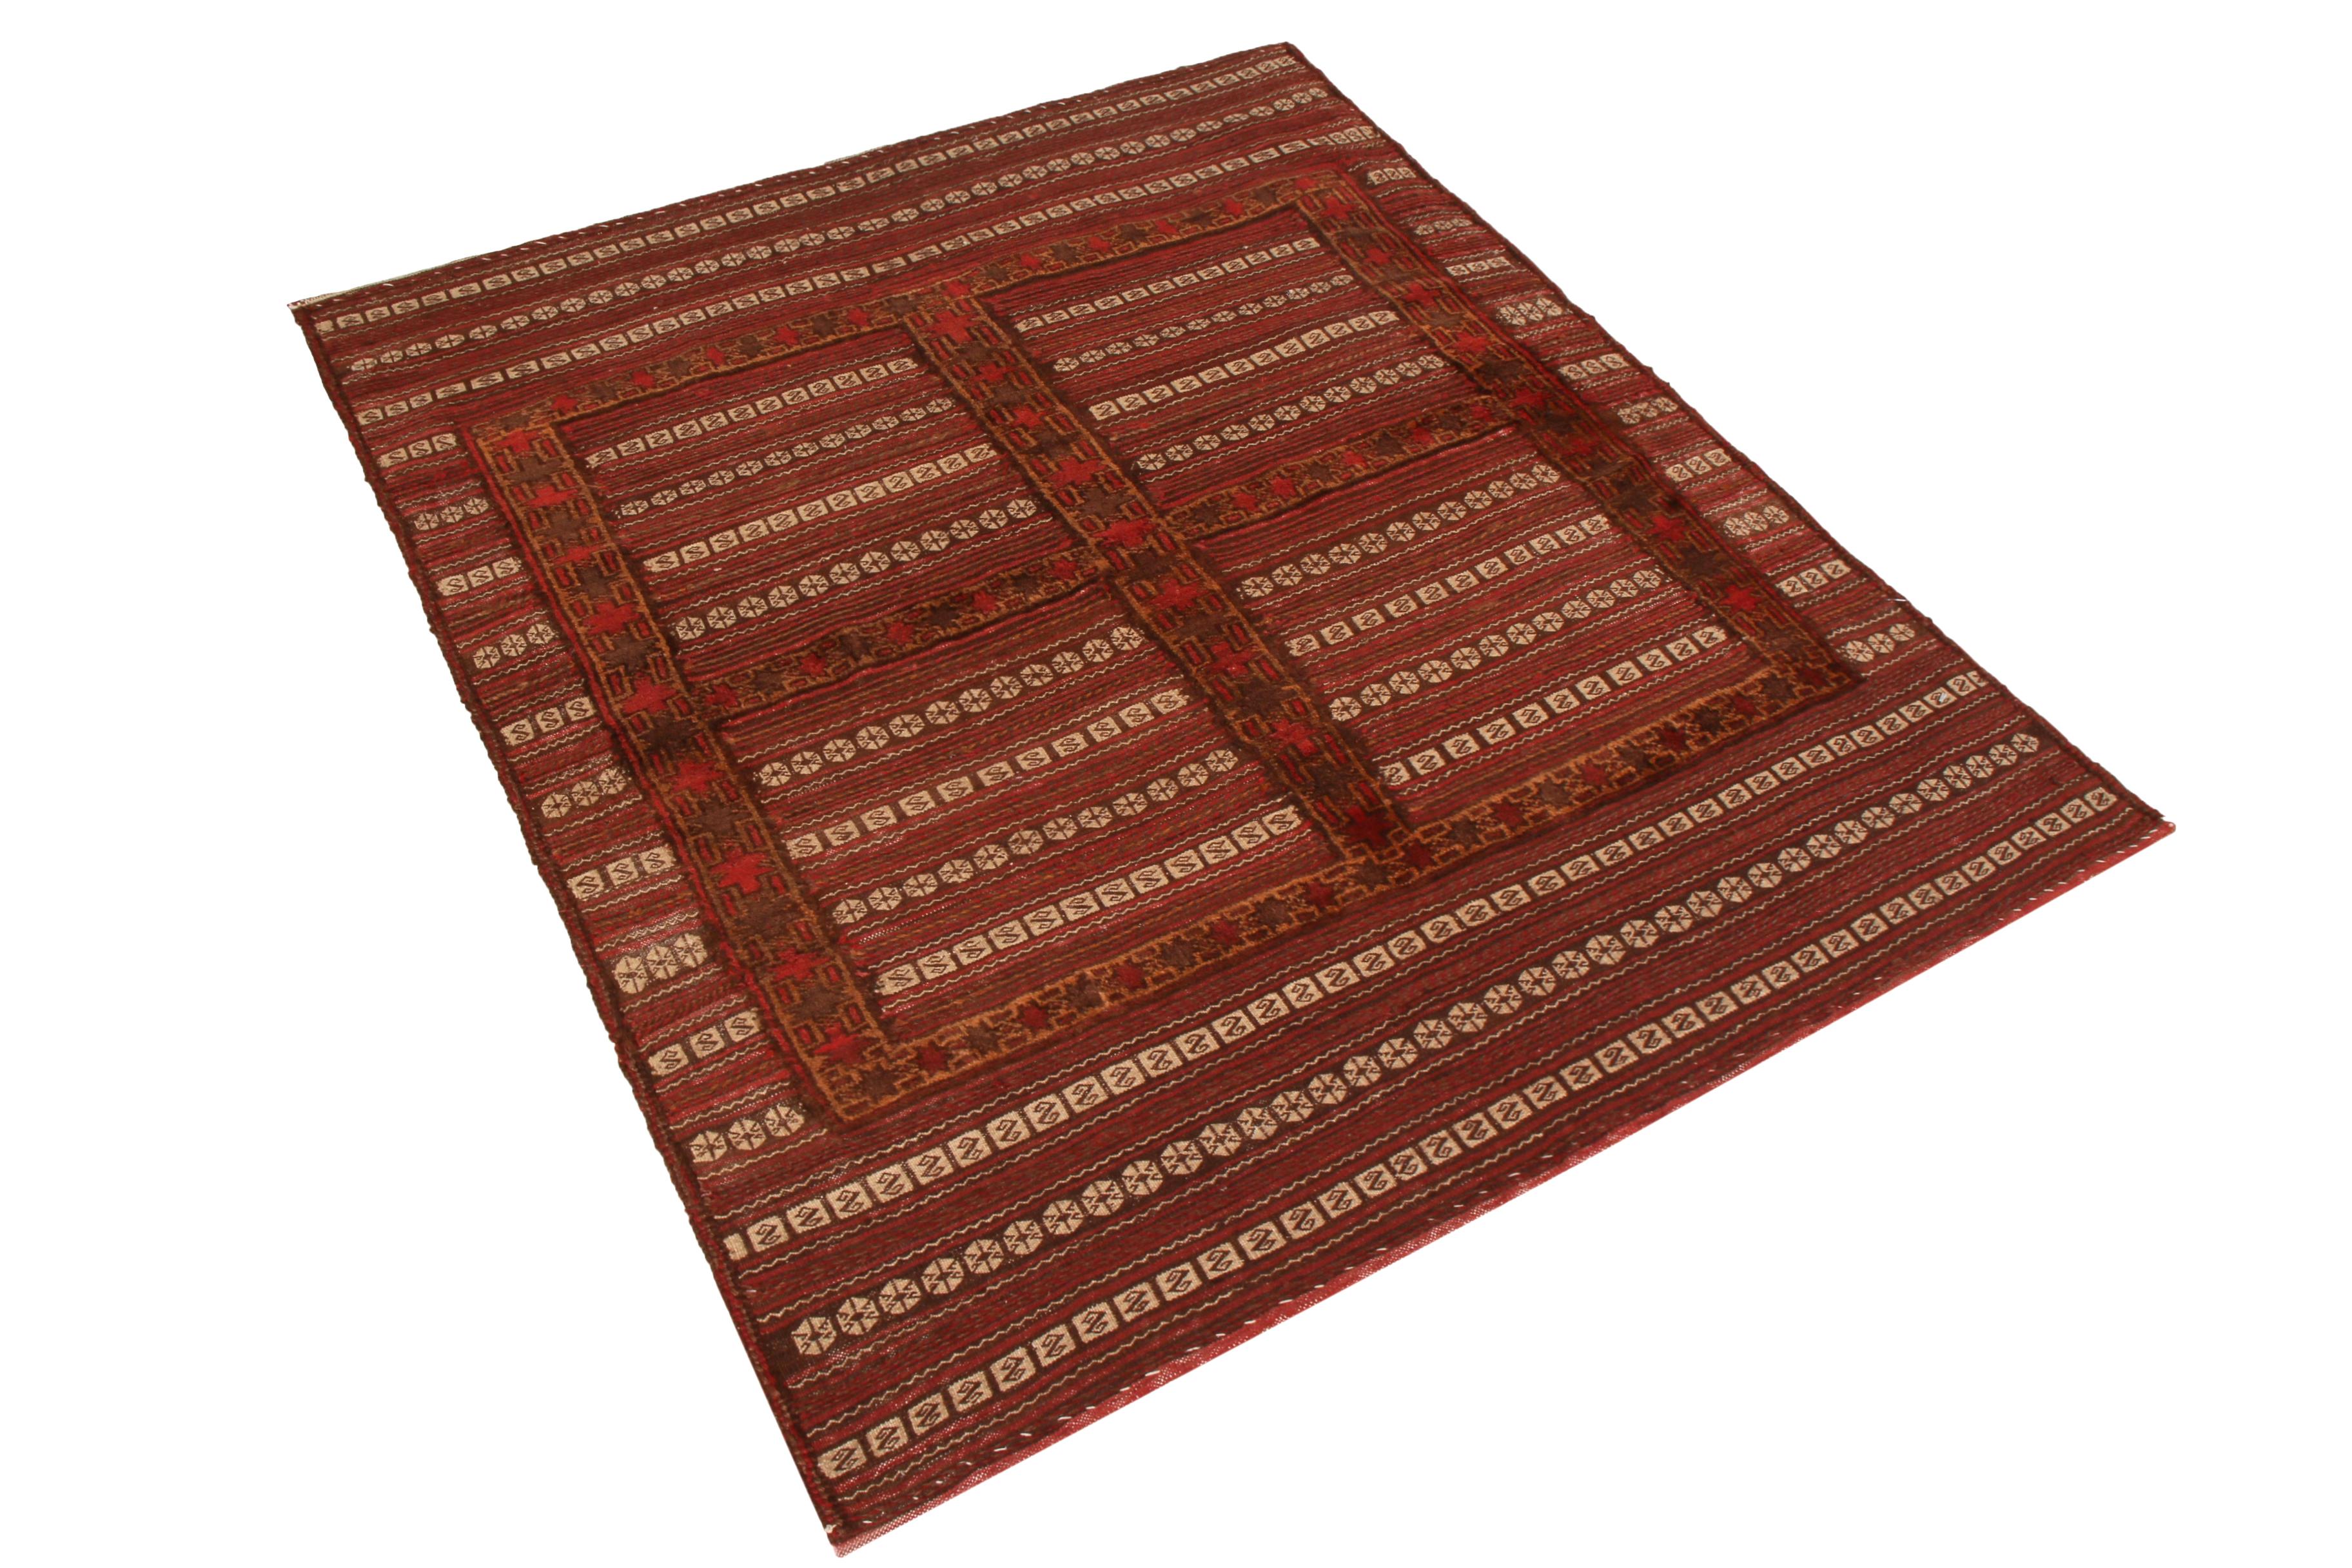 Made with handwoven wool originating from Afghanistan between 1890-1900, this antique kilim enjoys a meticulous, refined weave highlighting the rich repeating geometric-floral motifs through a tactful juxtaposition of beige with the richer brown and